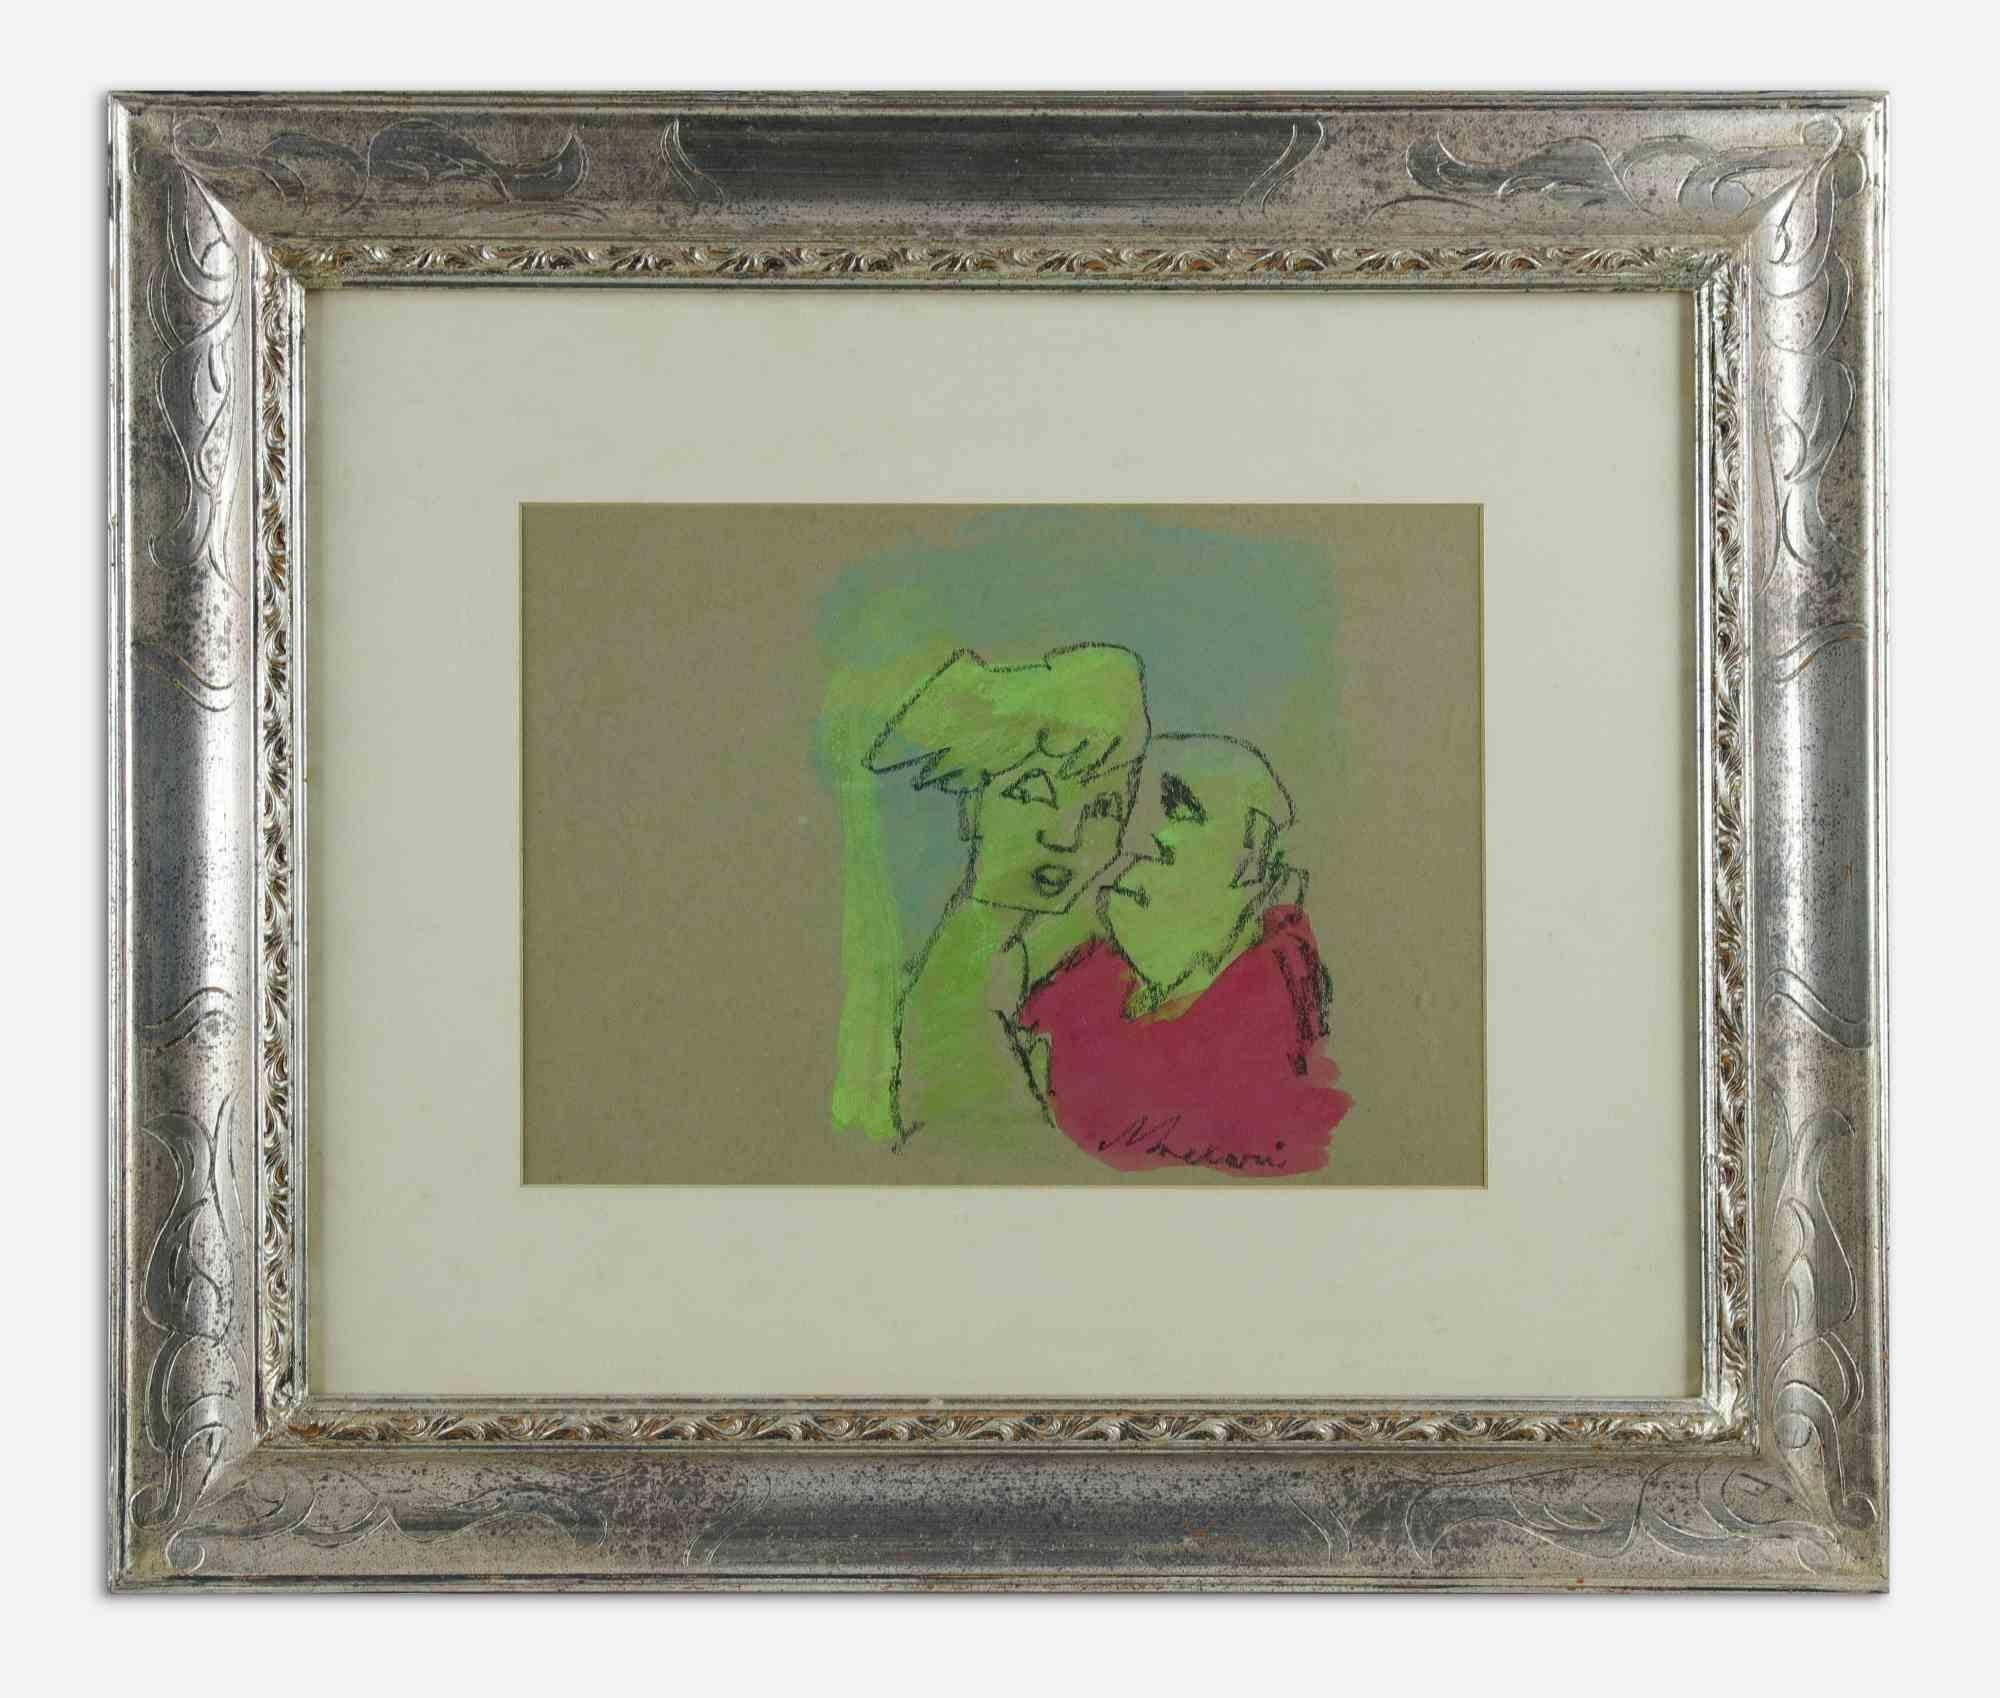 Figures is an original modern artwork realized by Mino Maccari in the mid-20th Century.

Mixed colored charcoal and watercolor drawing.

Hand signed on the lower margin.

Includes frame.